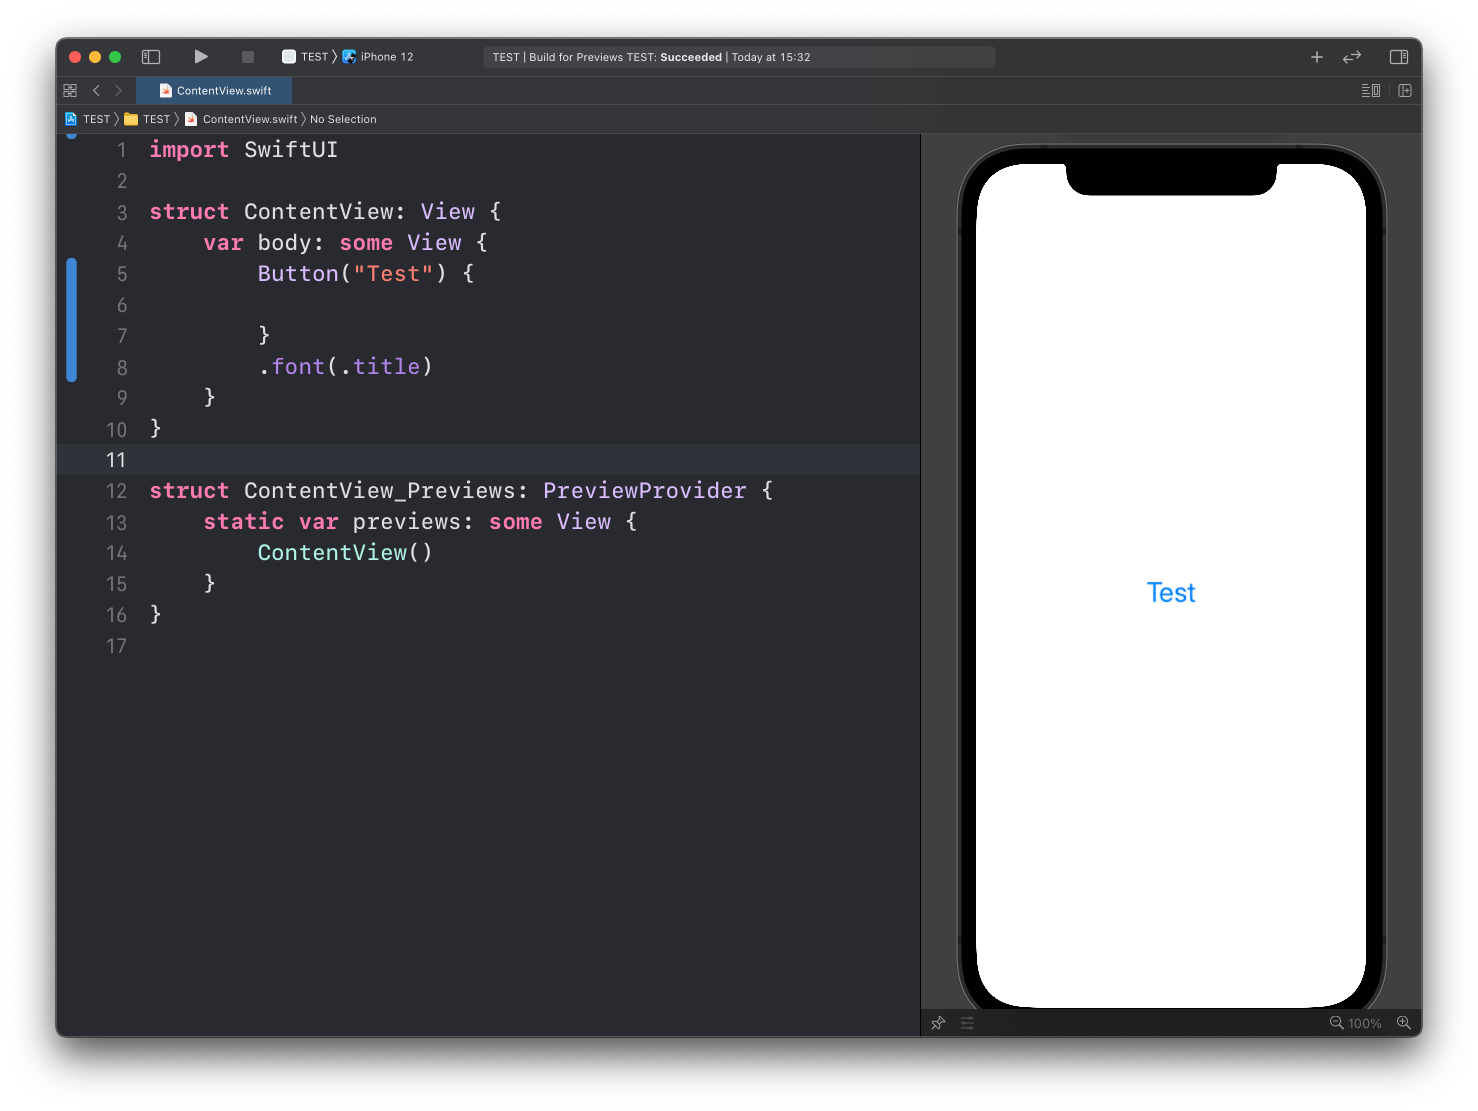 SwiftUI: the Button view and updating the app state